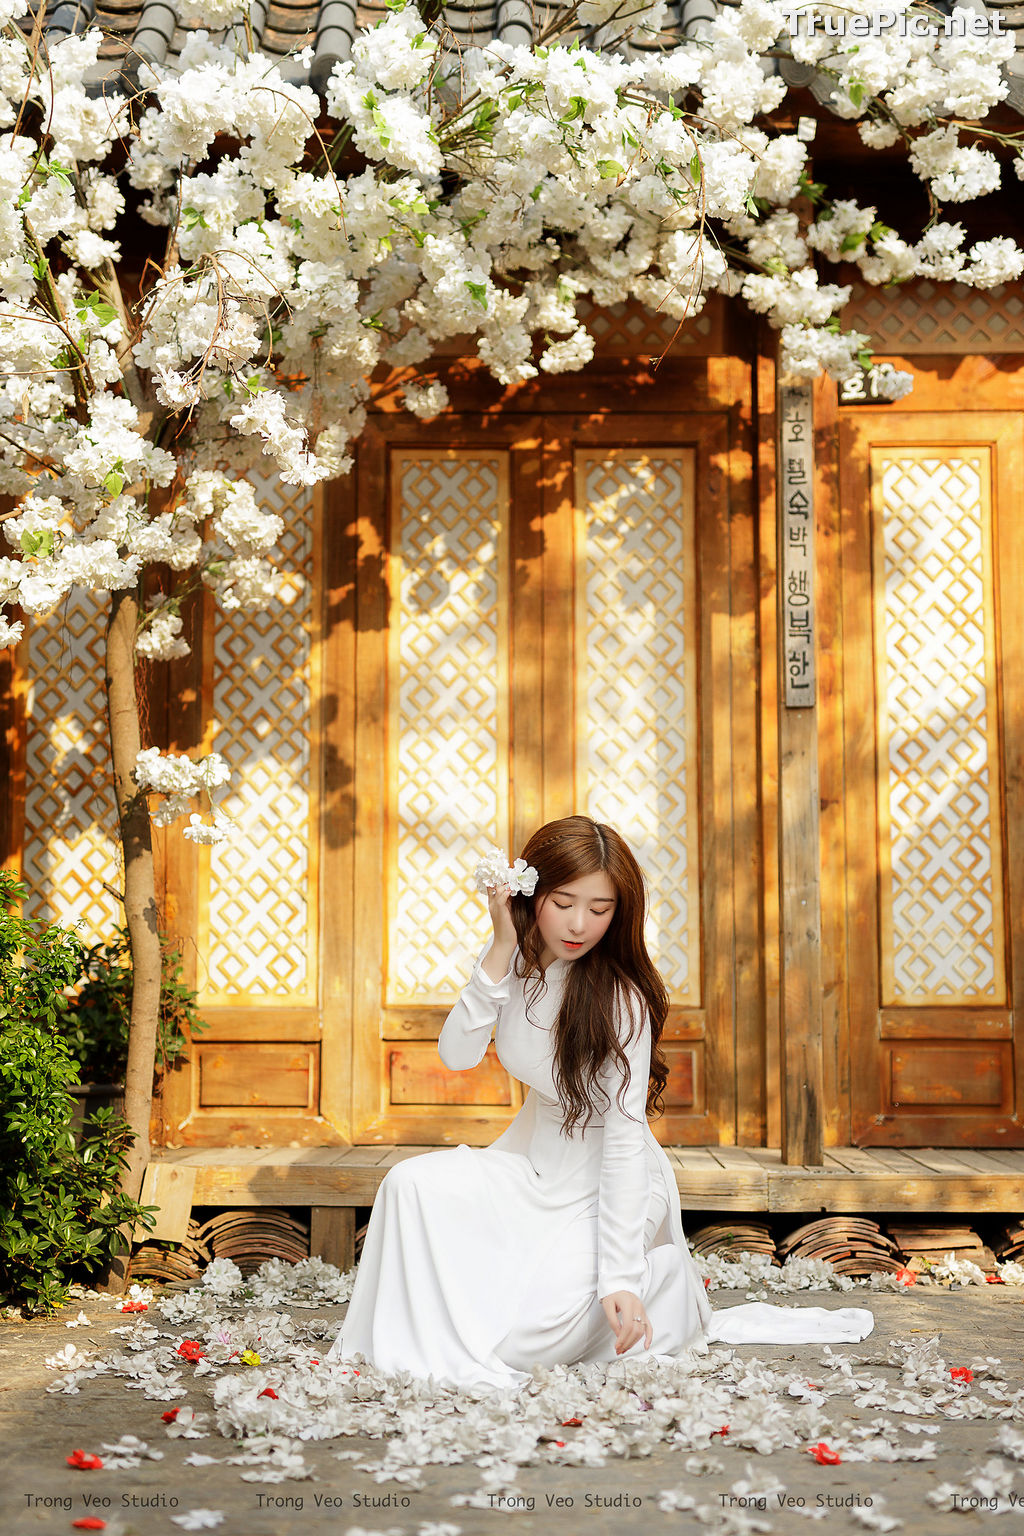 Image The Beauty of Vietnamese Girls with Traditional Dress (Ao Dai) #4 - TruePic.net - Picture-25